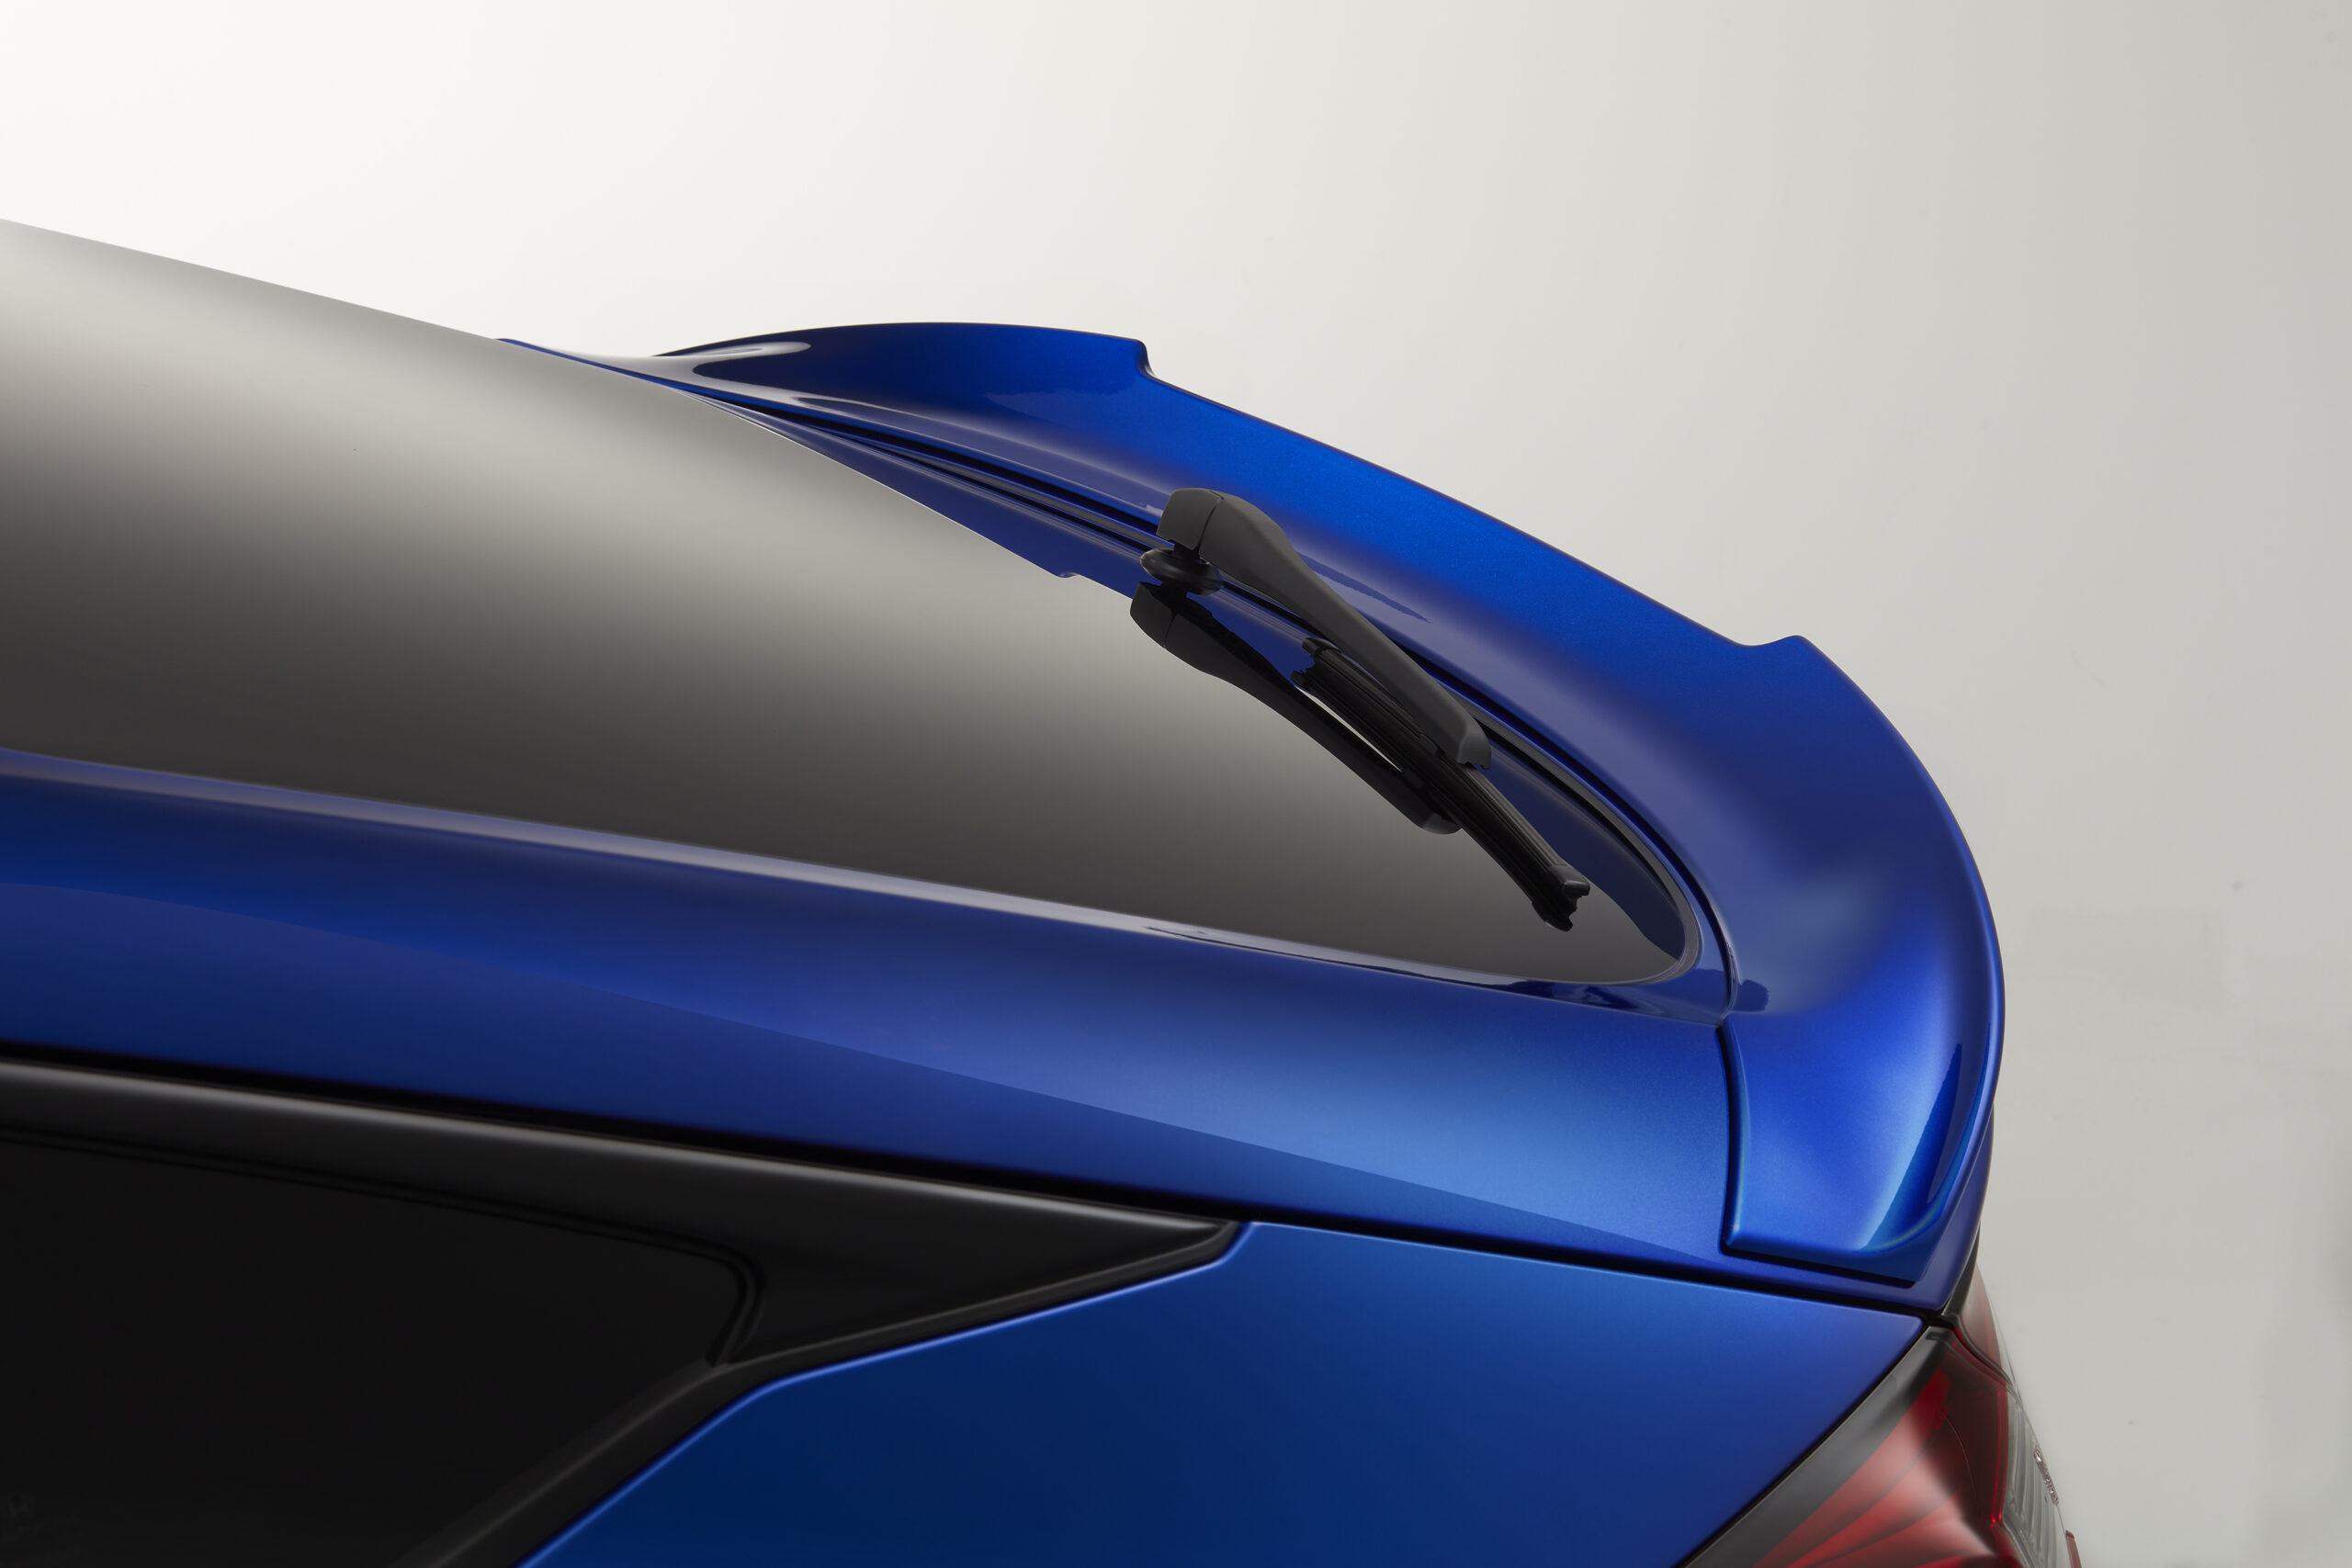 https://www.coxmotorparts.co.uk/wp-content/uploads/2022/09/2023-civic-ducktail-spoiler-08f02-t50-6s0h-scaled.jpg